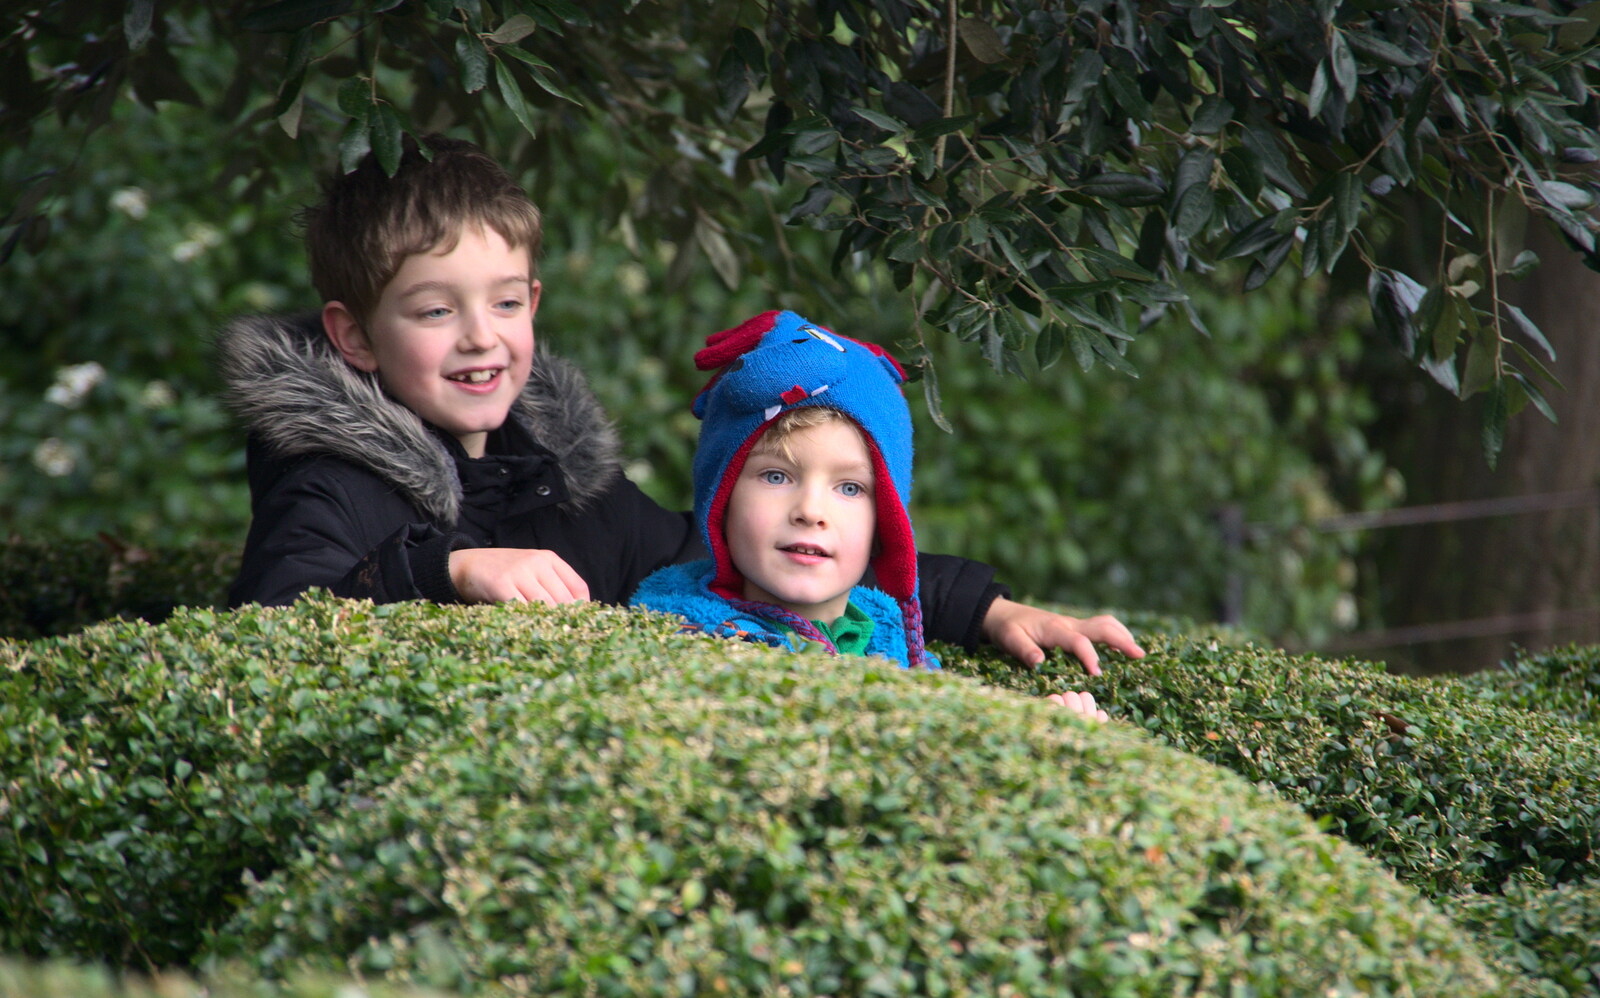 The boys find a nice maze to mess around in from Killerton House, Broadclyst, Devon - 30th December 2017